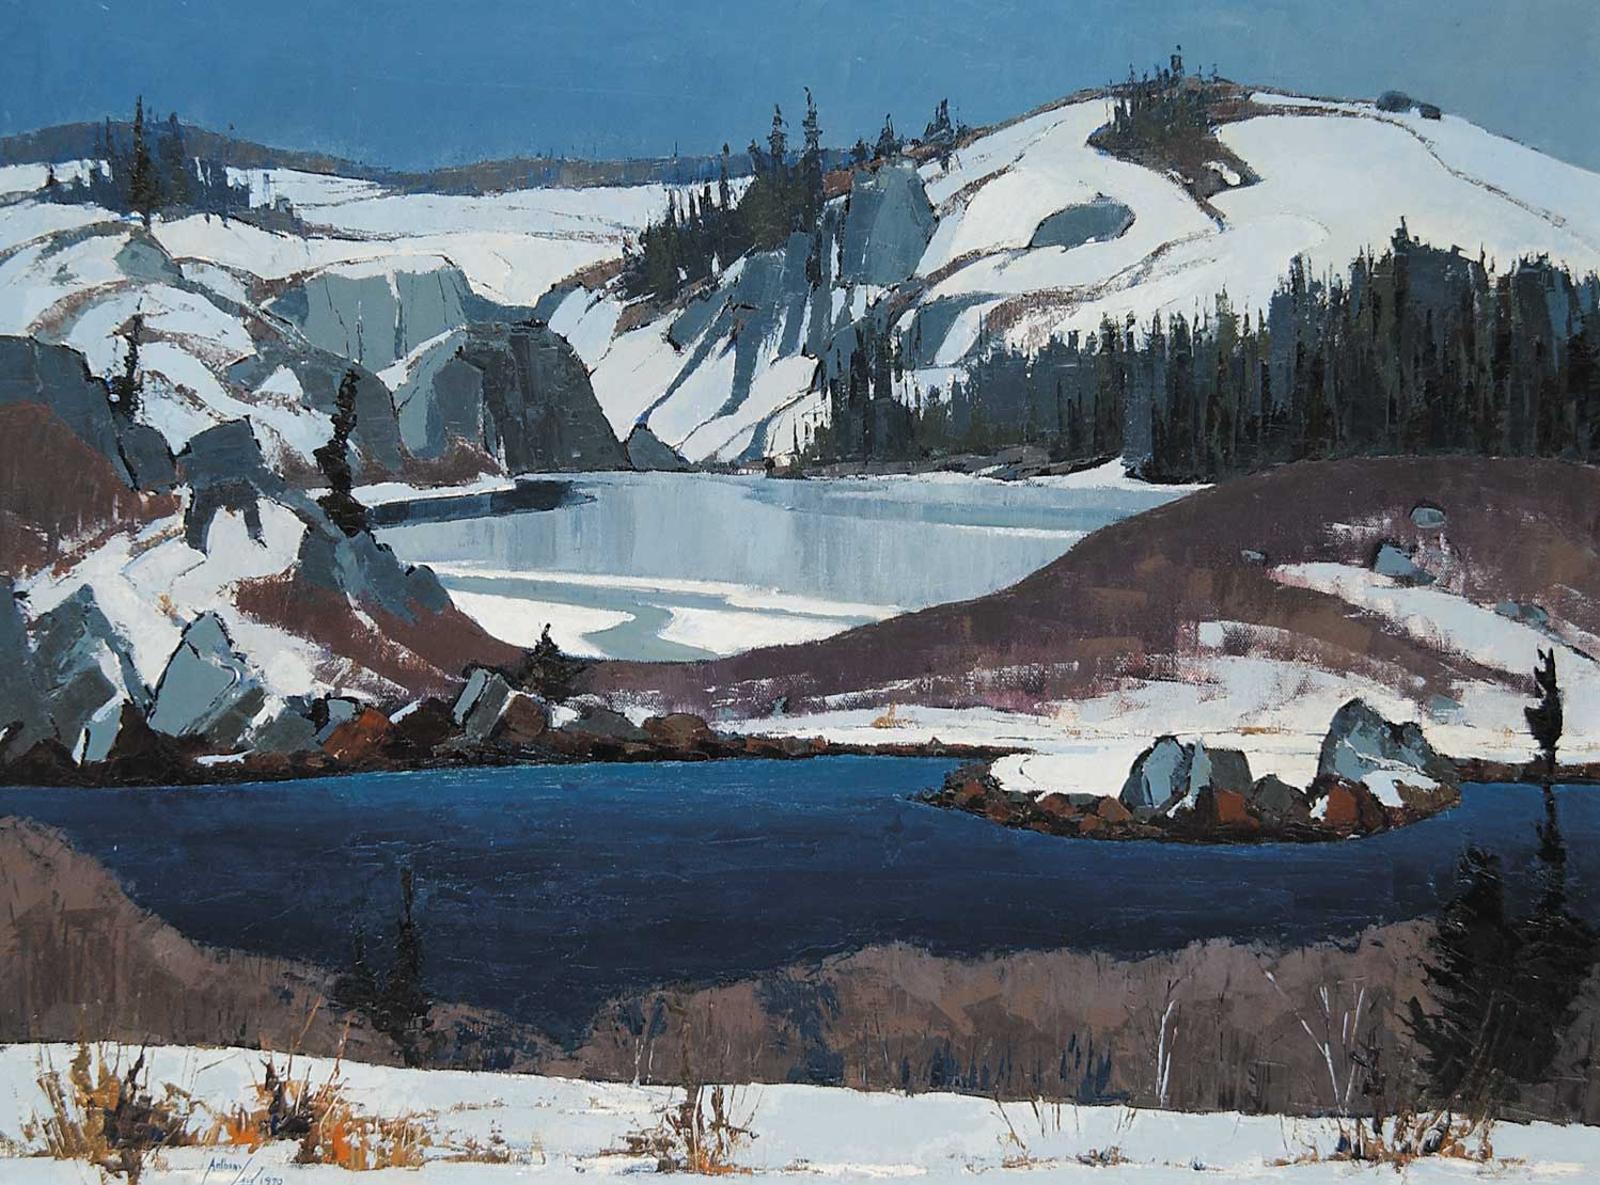 Charles Anthony Francis Law (1916-1996) - The Frozen Lake, Terrace Bay, N.S.